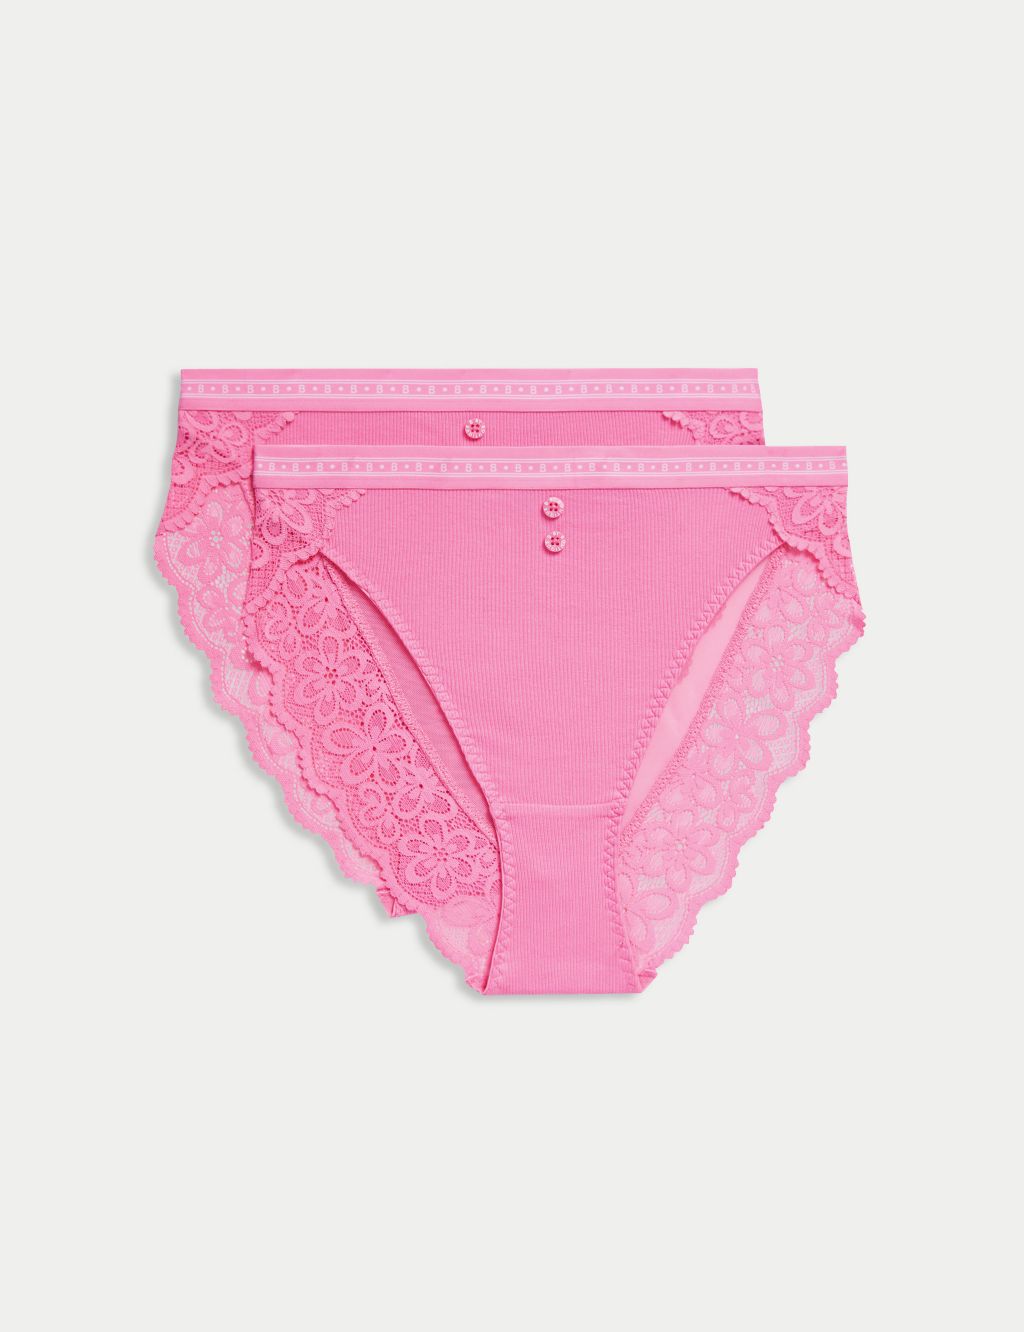 M&S shoppers are obsessed with these £8 high-rise knickers - and we need a  pair - Mirror Online